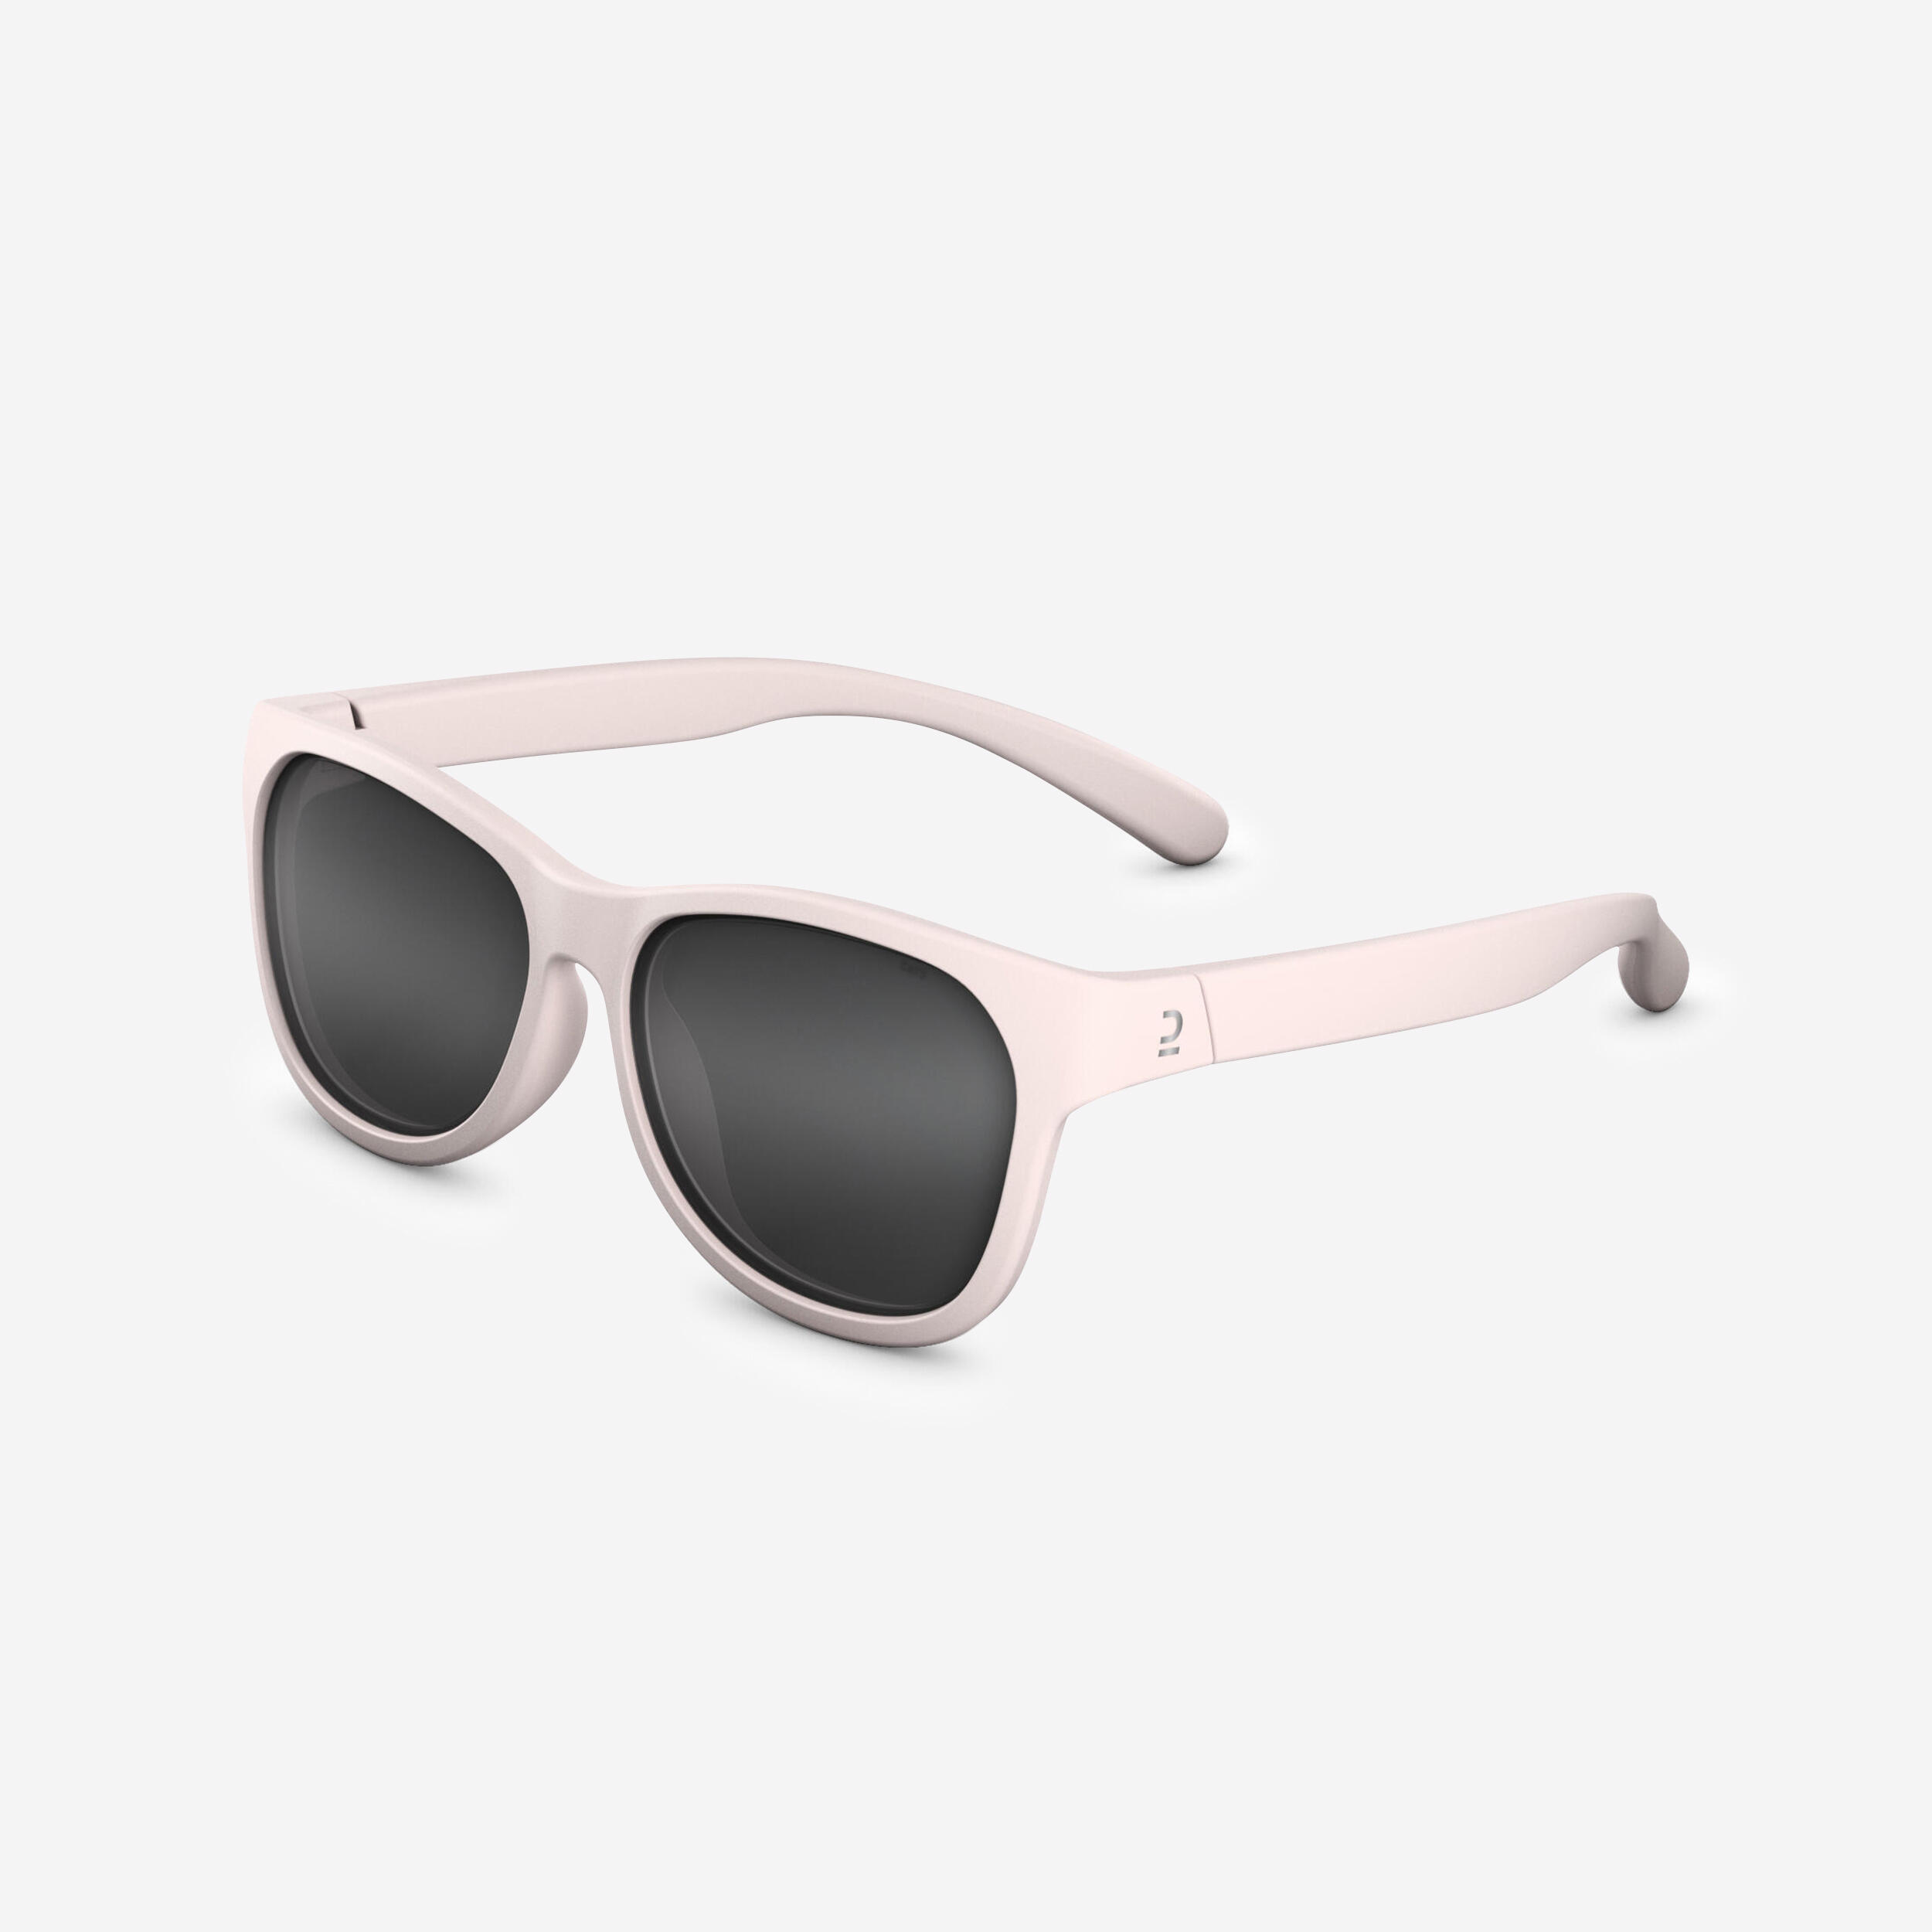 Quechua Hiking Sunglasses - MH B140 Child 2 4 Years Category 3 Pink